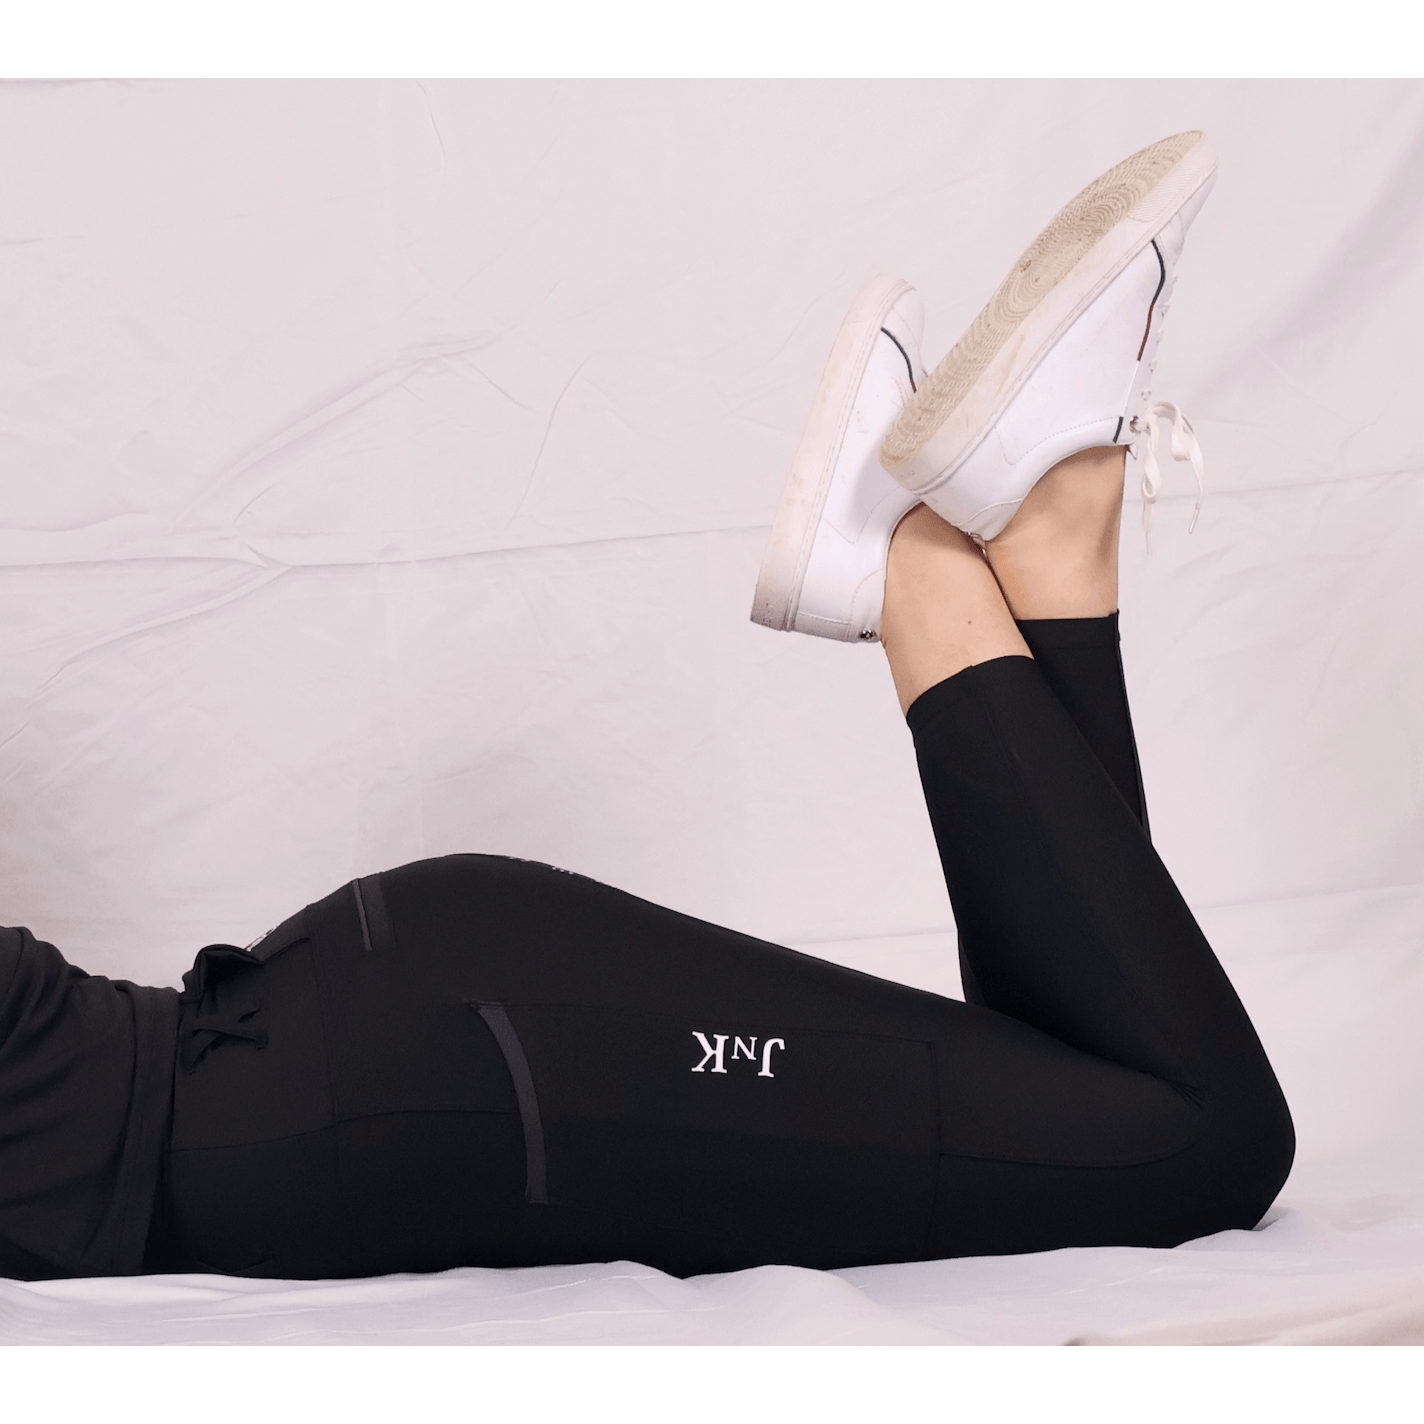 Person lying down showcasing black horse riding tights and white sneakers.